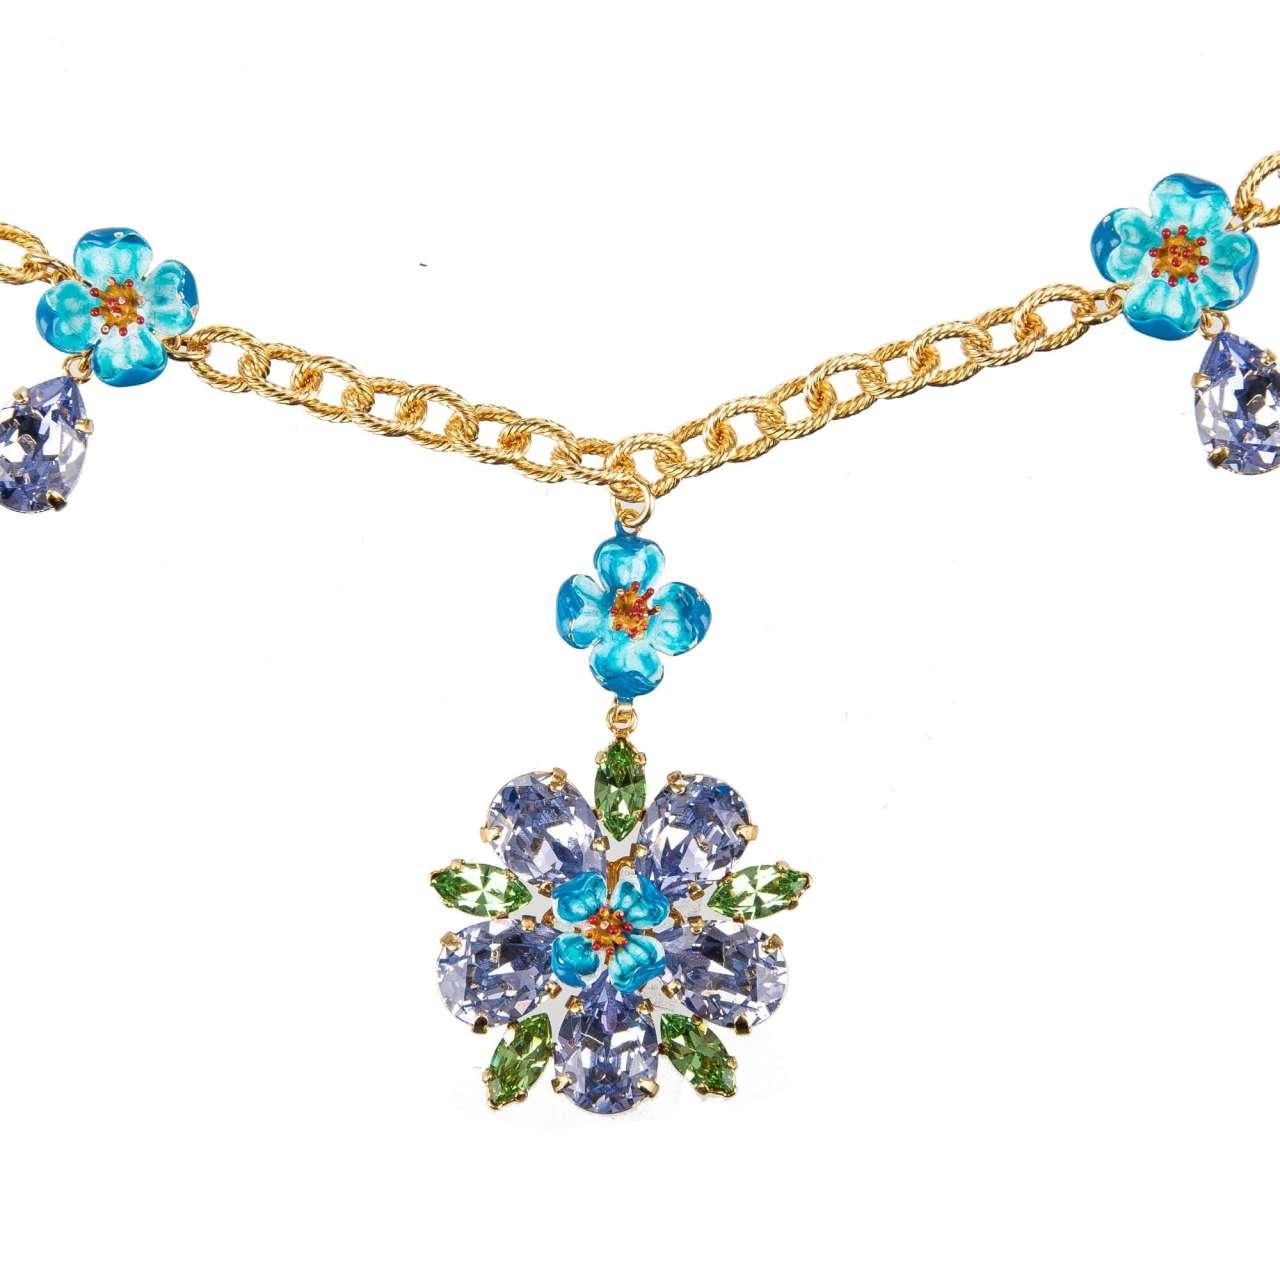 - Chocker necklace with blue crystals and hand-painted cherry flowers in gold by DOLCE & GABBANA - RUNWAY - Dolce & Gabbana Fashion Show - New with Box - Made in Italy - Nickel free - Model: WNK6G2-W1111-Z0000 - Material:  70% Brass, 30% Crystals -